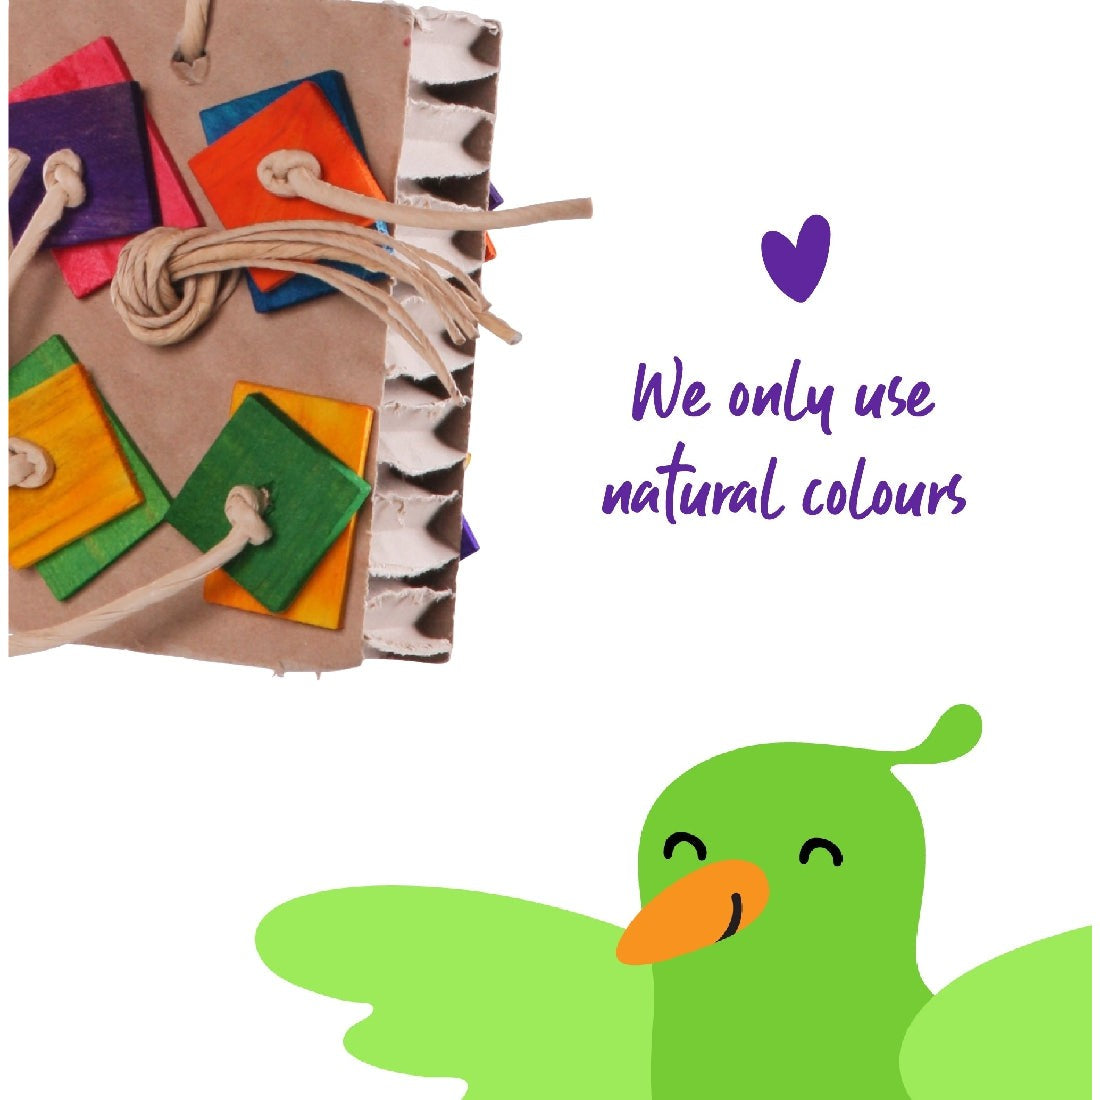 Colorful bird toy with natural colors text and cartoon bird.